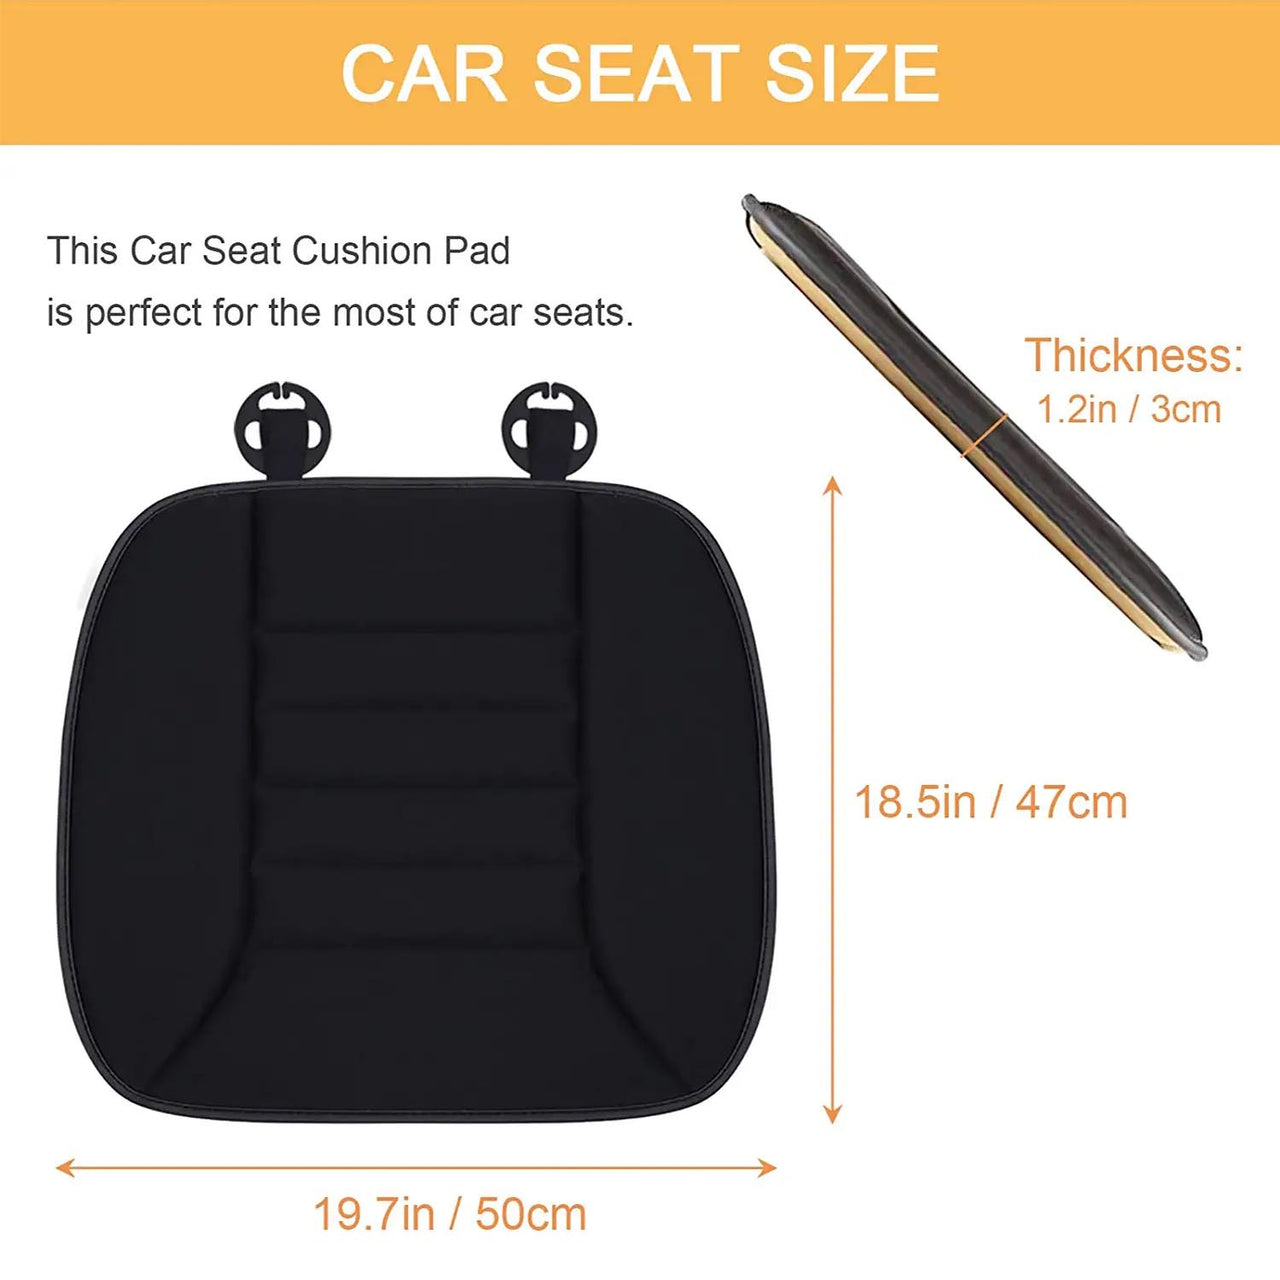 Car Seat Cushion with 1.2inch Comfort Memory Foam, Custom Logo For Your Cars, Seat Cushion for Car and Office Chair FD19989